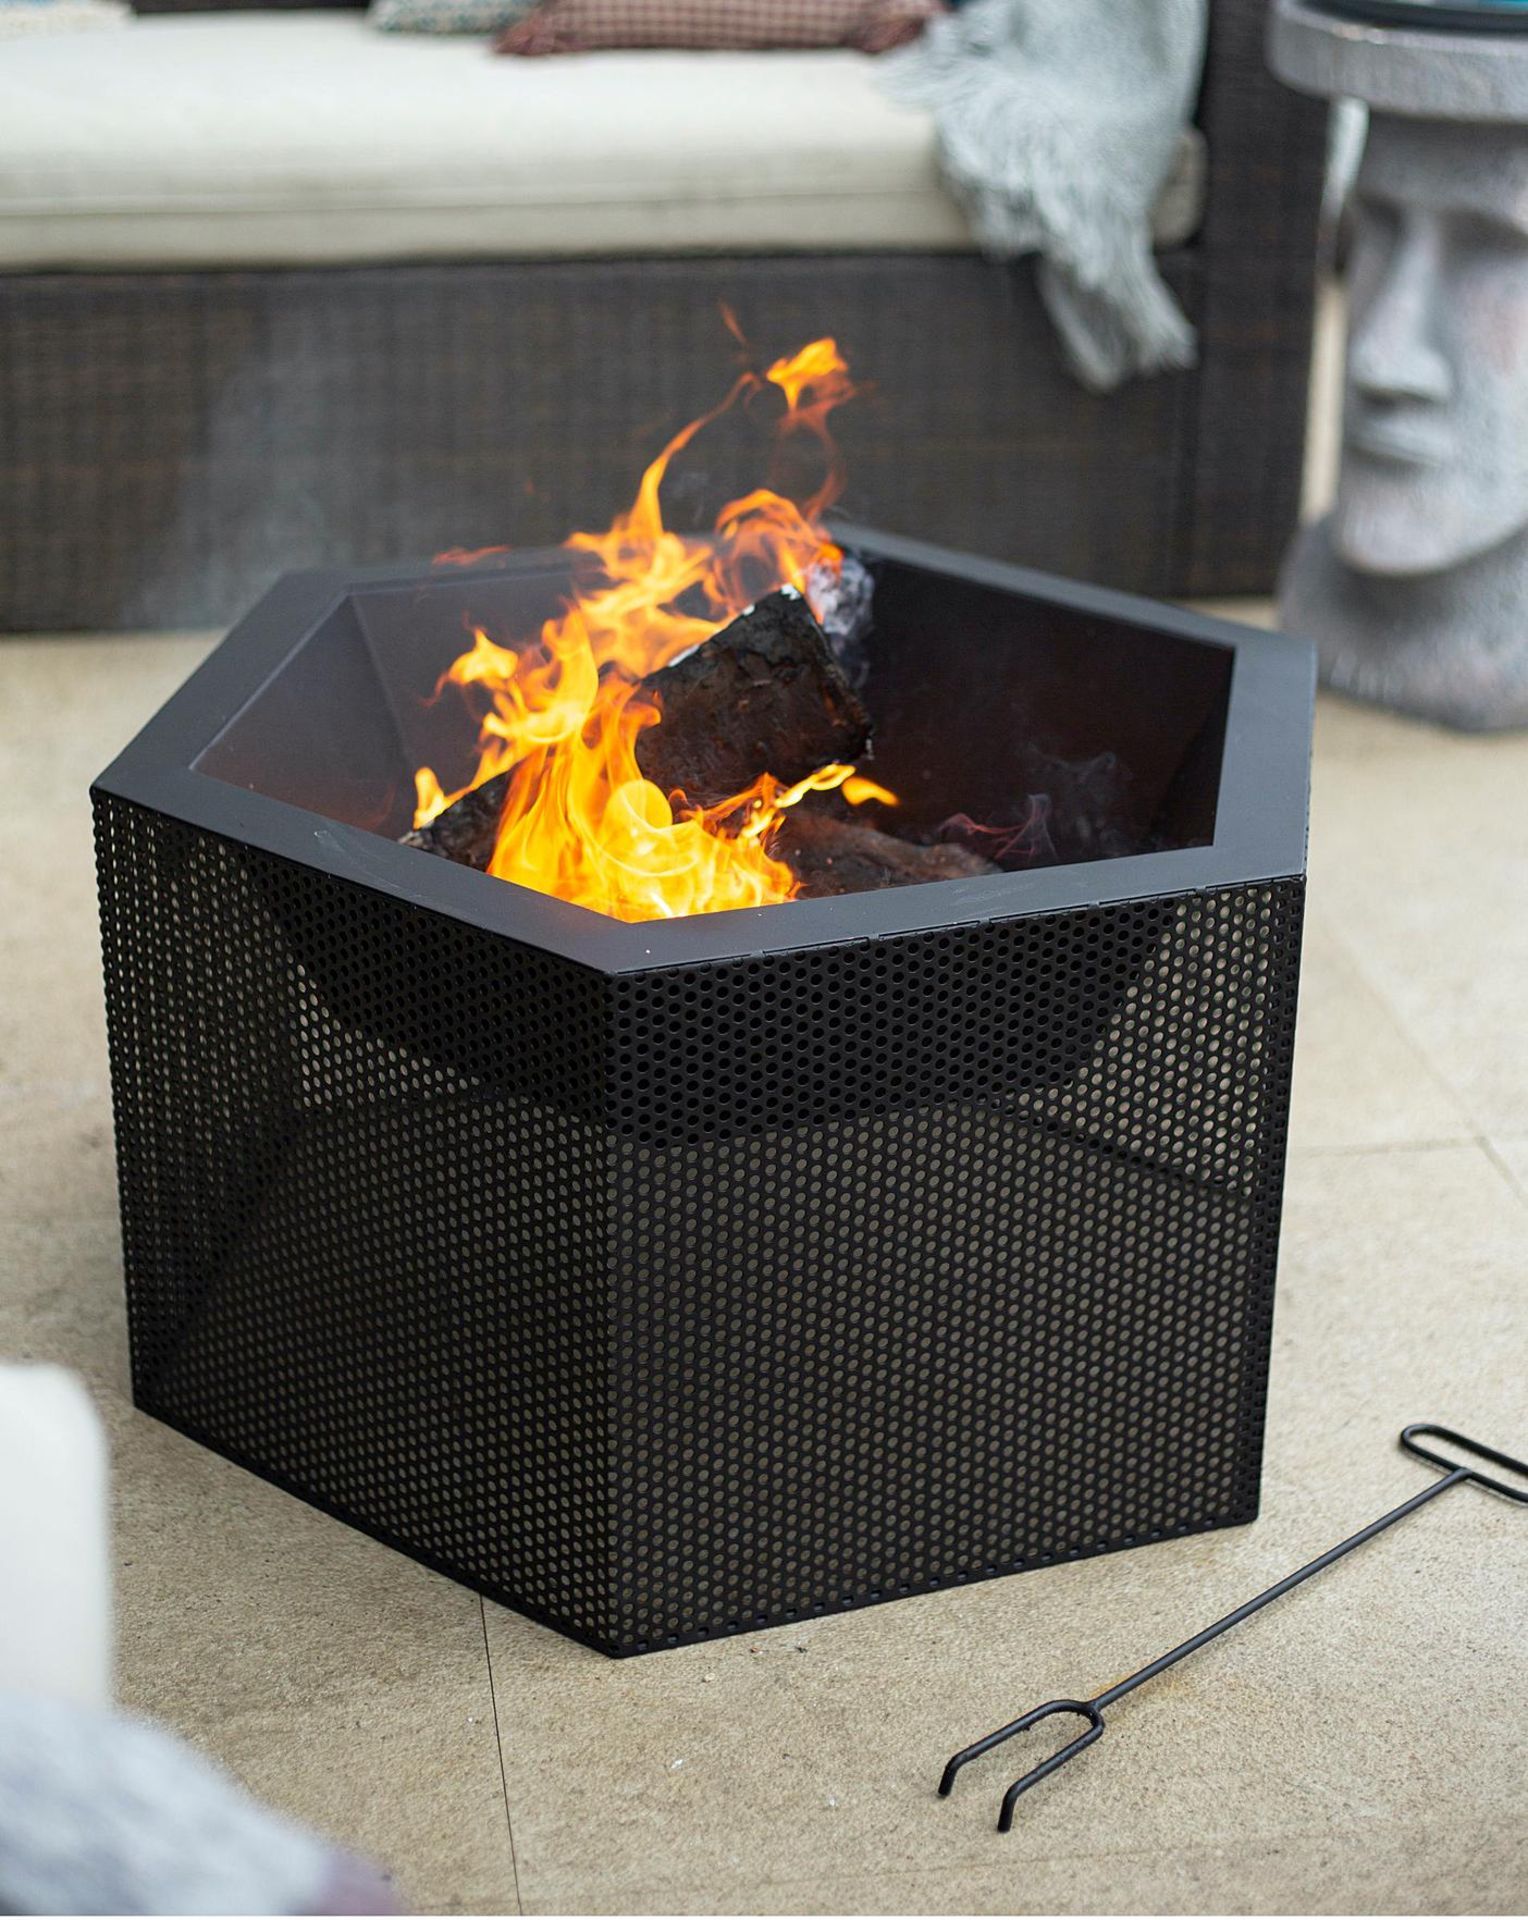 NEW & BOXED LA HACIENDA Mesh Hexagonal Firepit. RRP £139.99. Simple and stylish, this functional